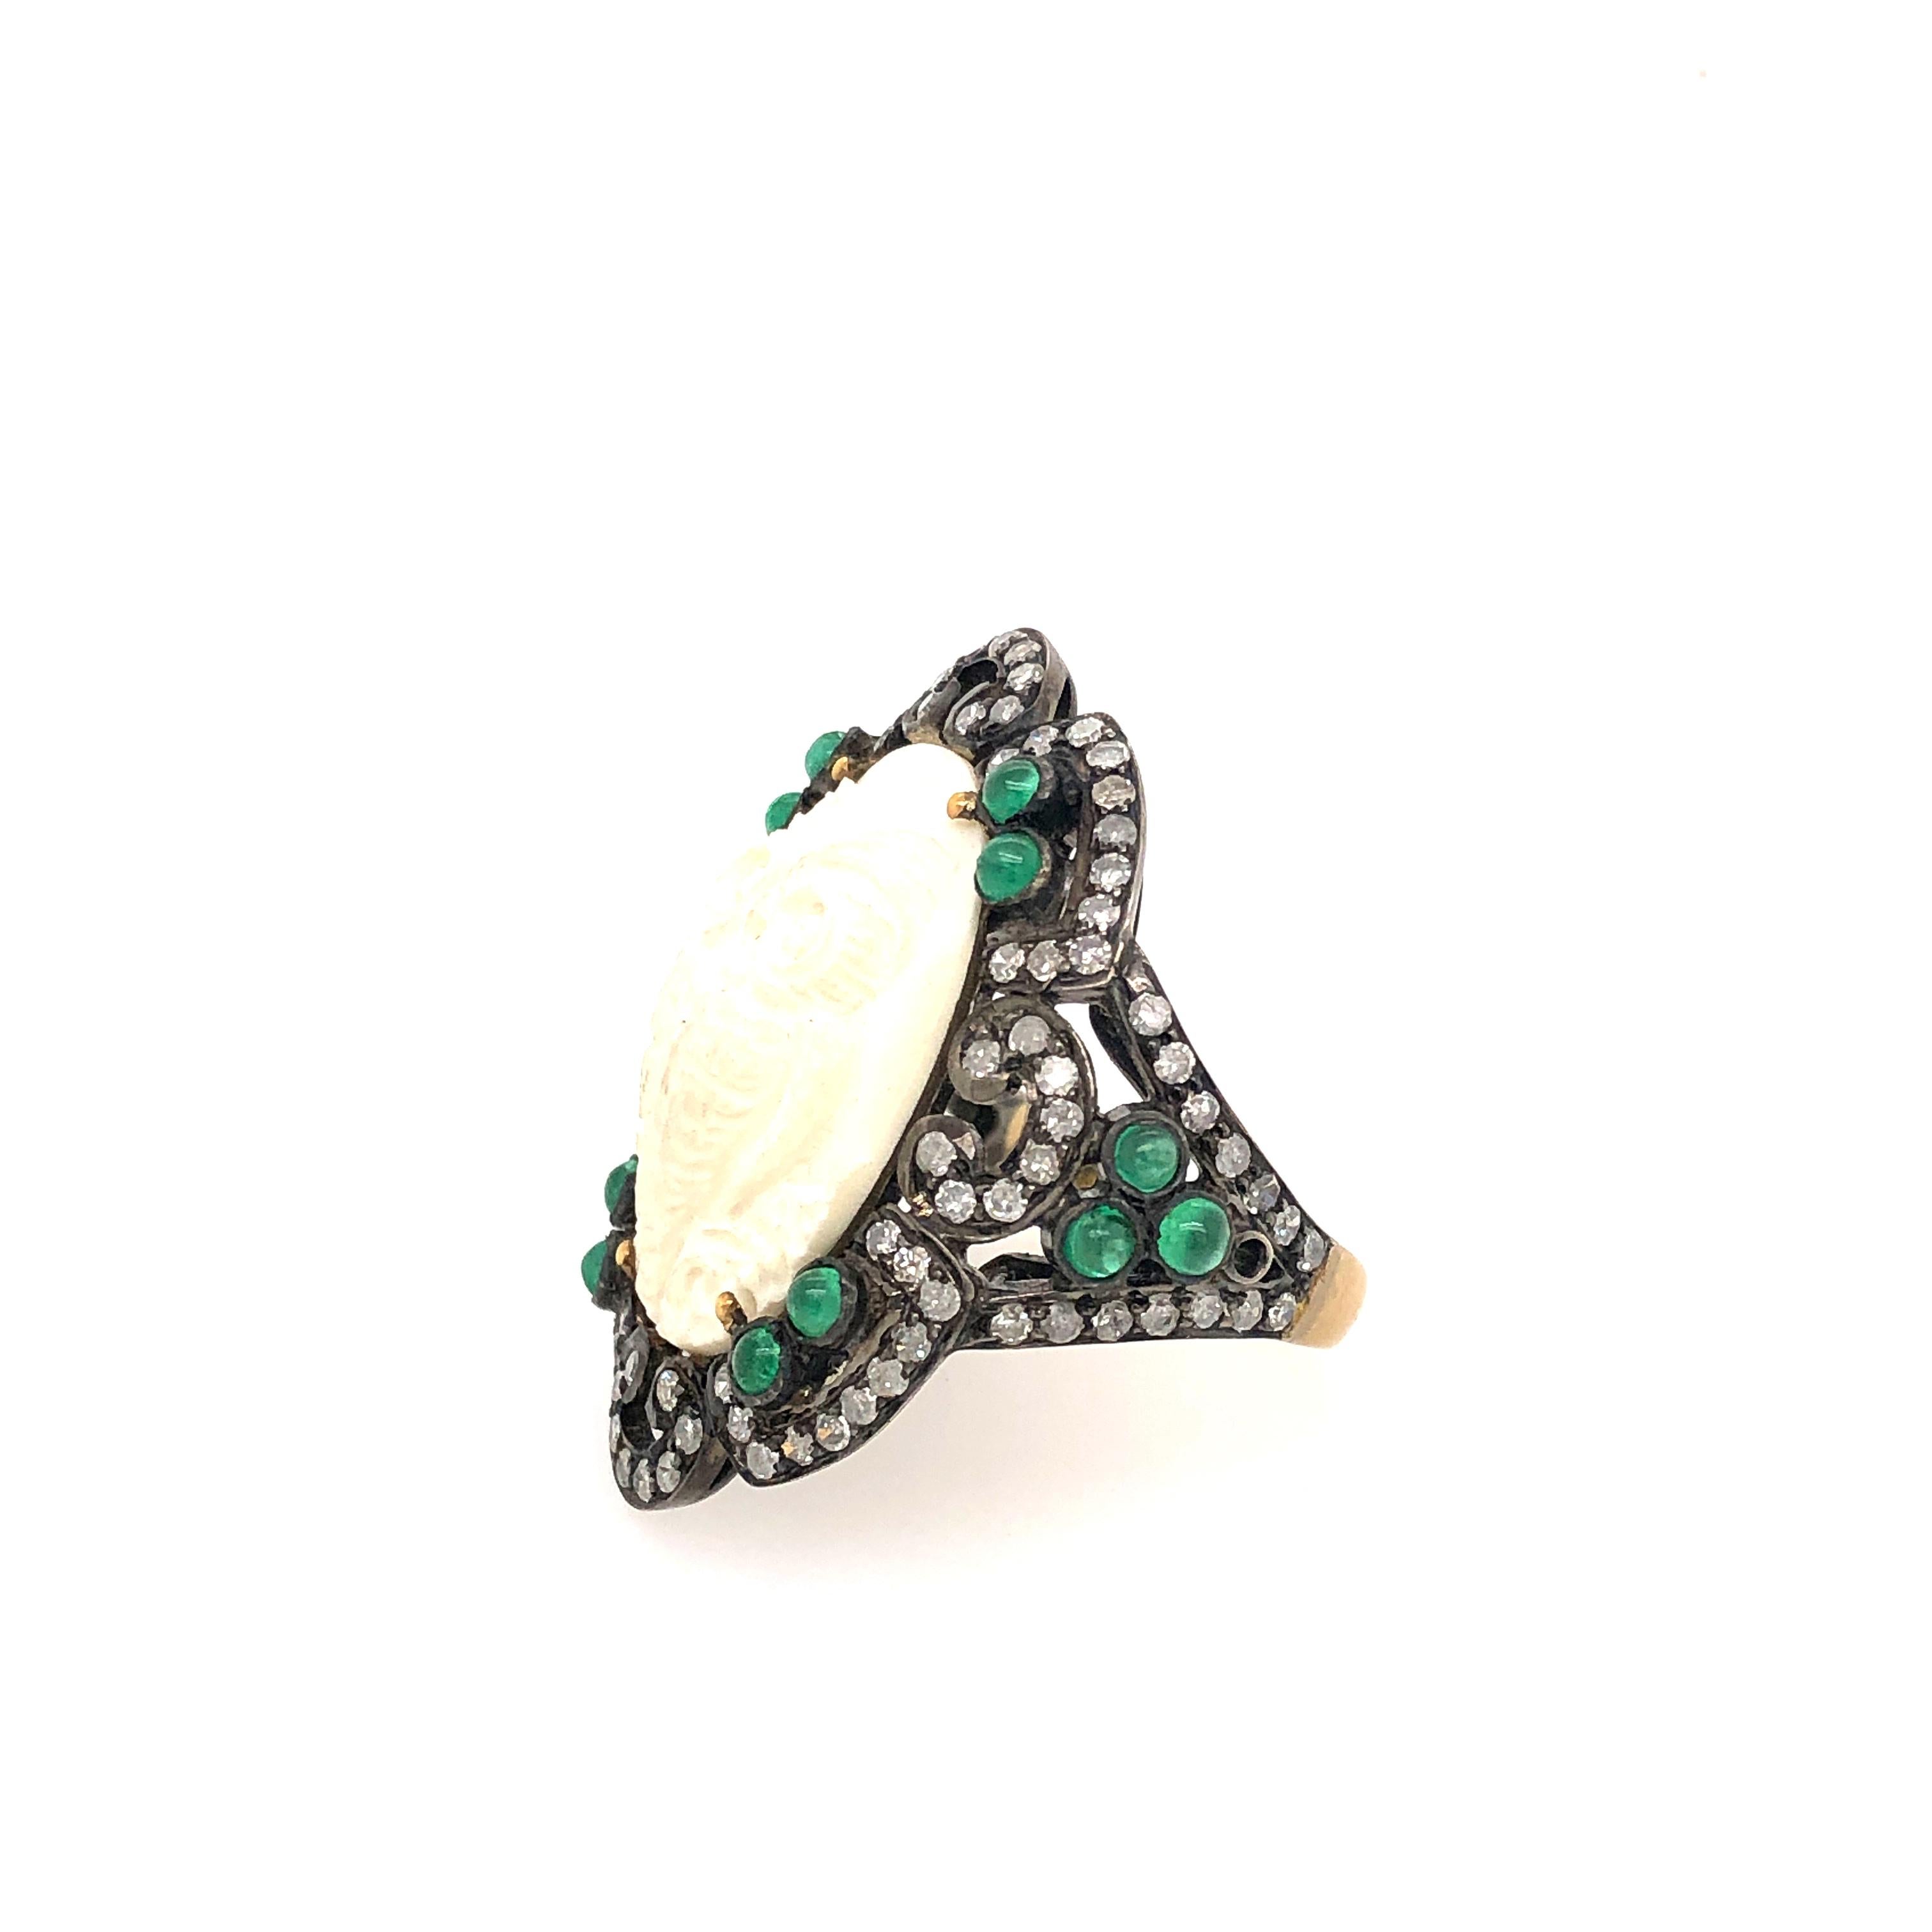 Emerald Cut Owl Cameo Ring with Diamonds and Emeralds For Sale